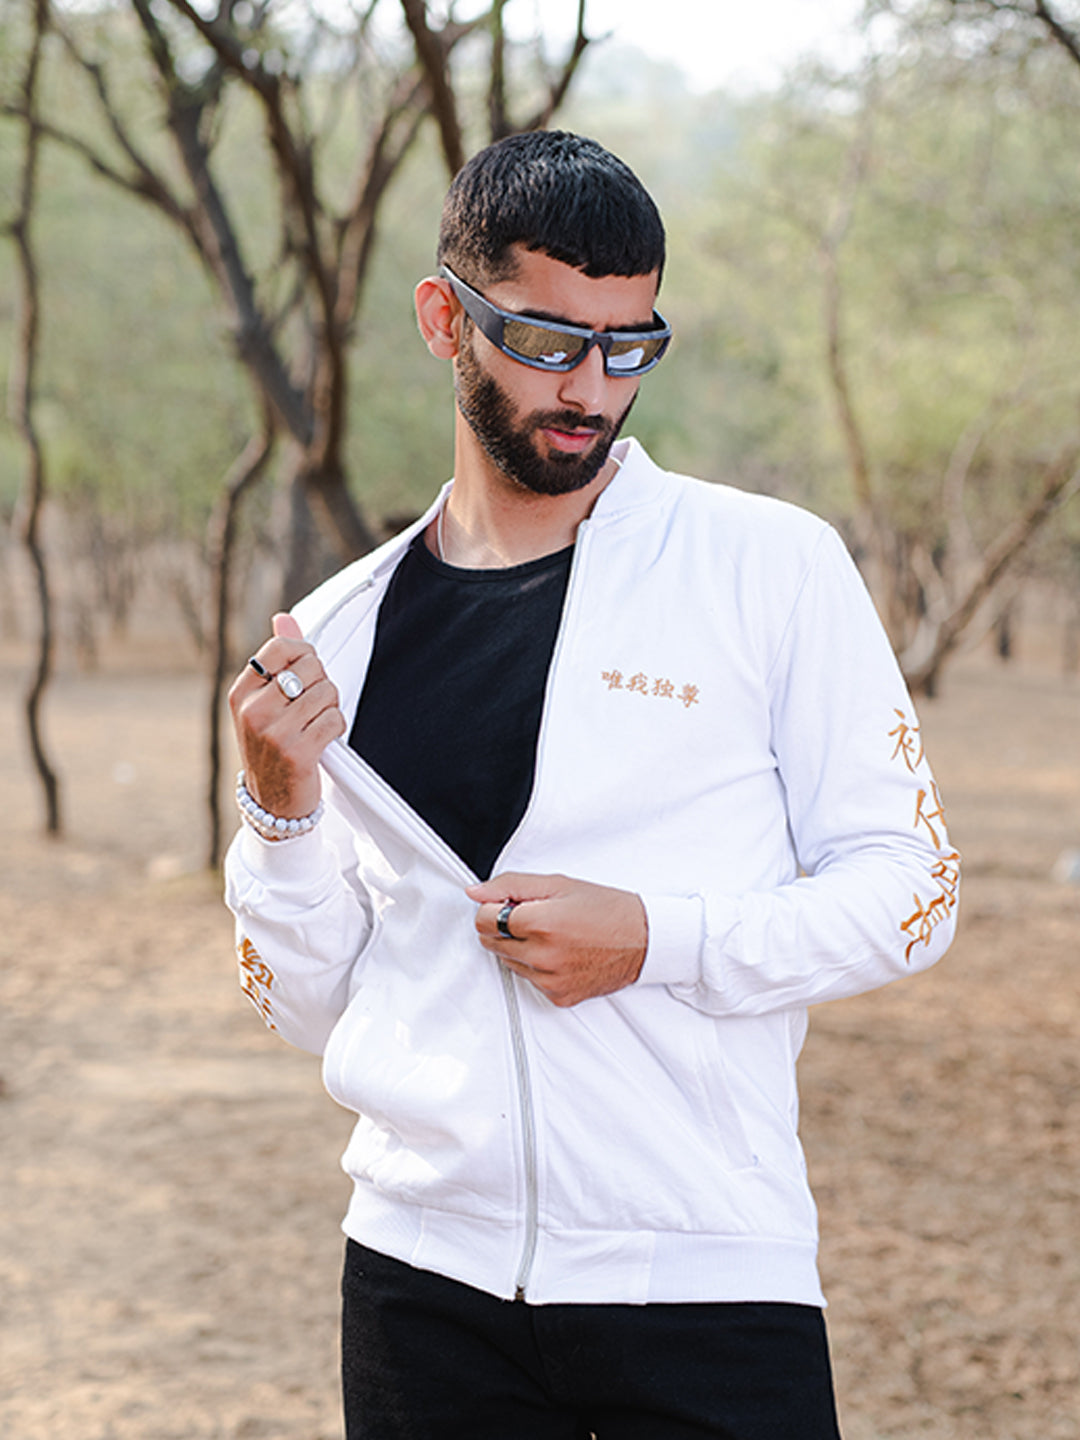 Slanng™ | ✓ Varsity jackets/ Emroidered/ Luffy/ Onepiece/ ED 03 ⭐ India's  first fully emroidered top quality anime varsity jackets are out now... |  Instagram